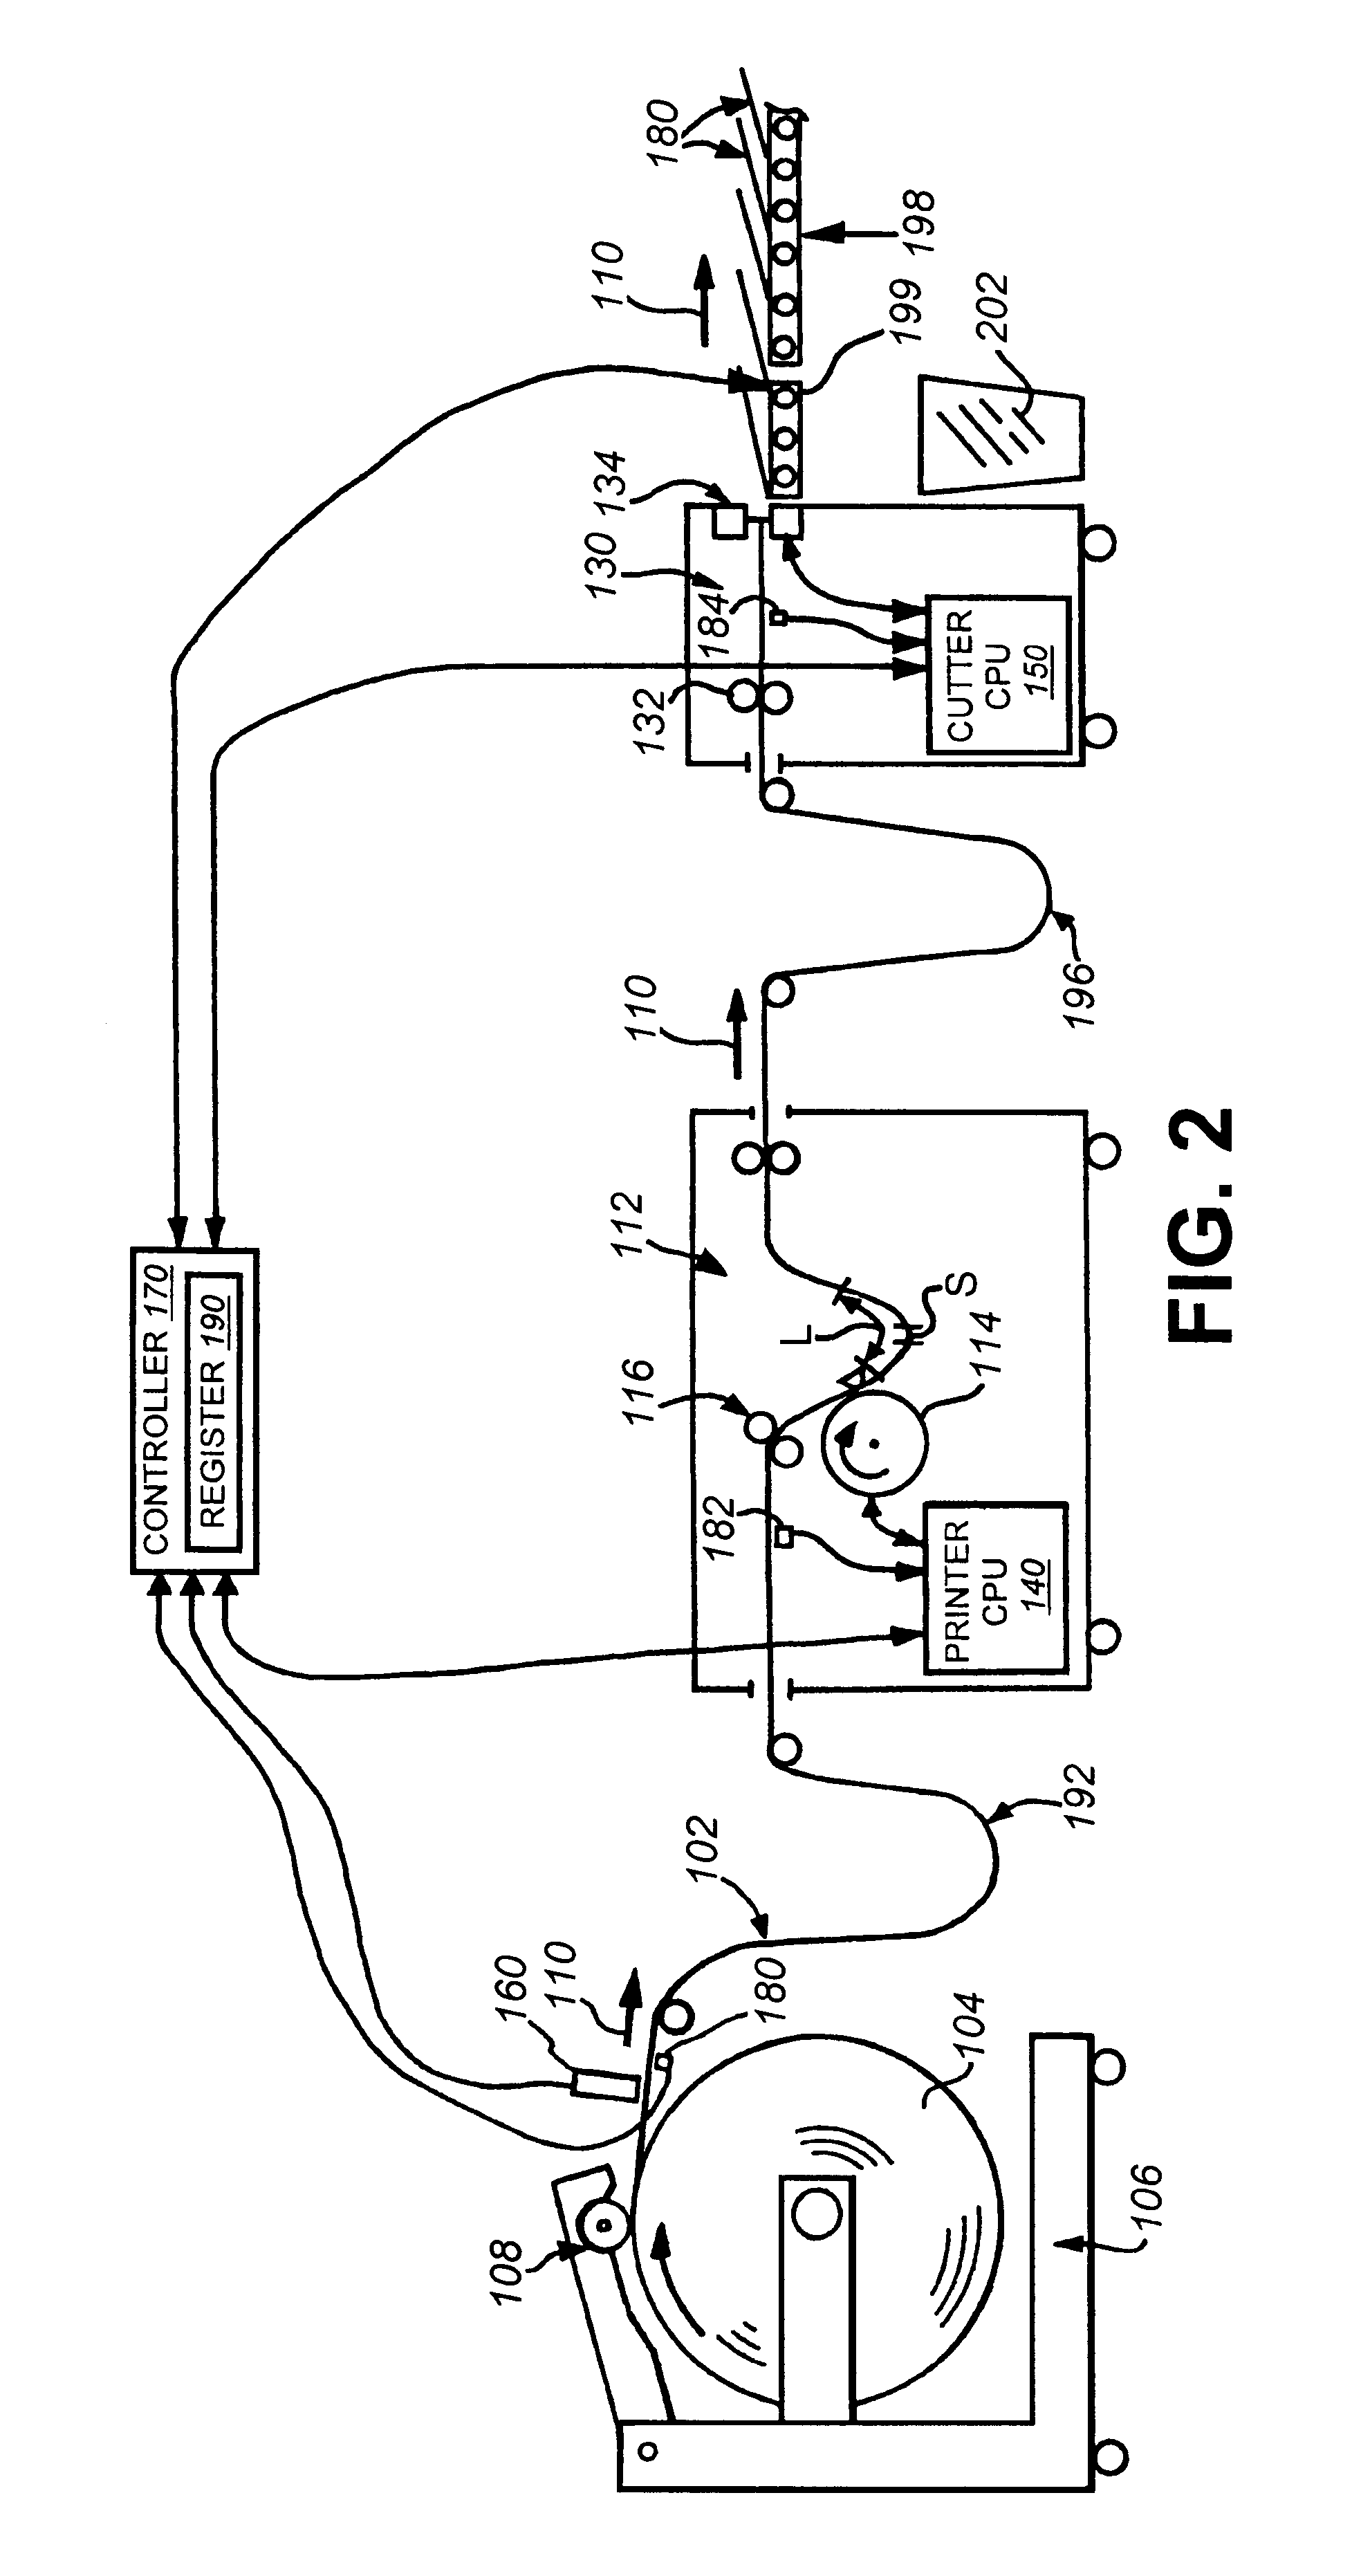 System and method for utilizing web from a roll having splices